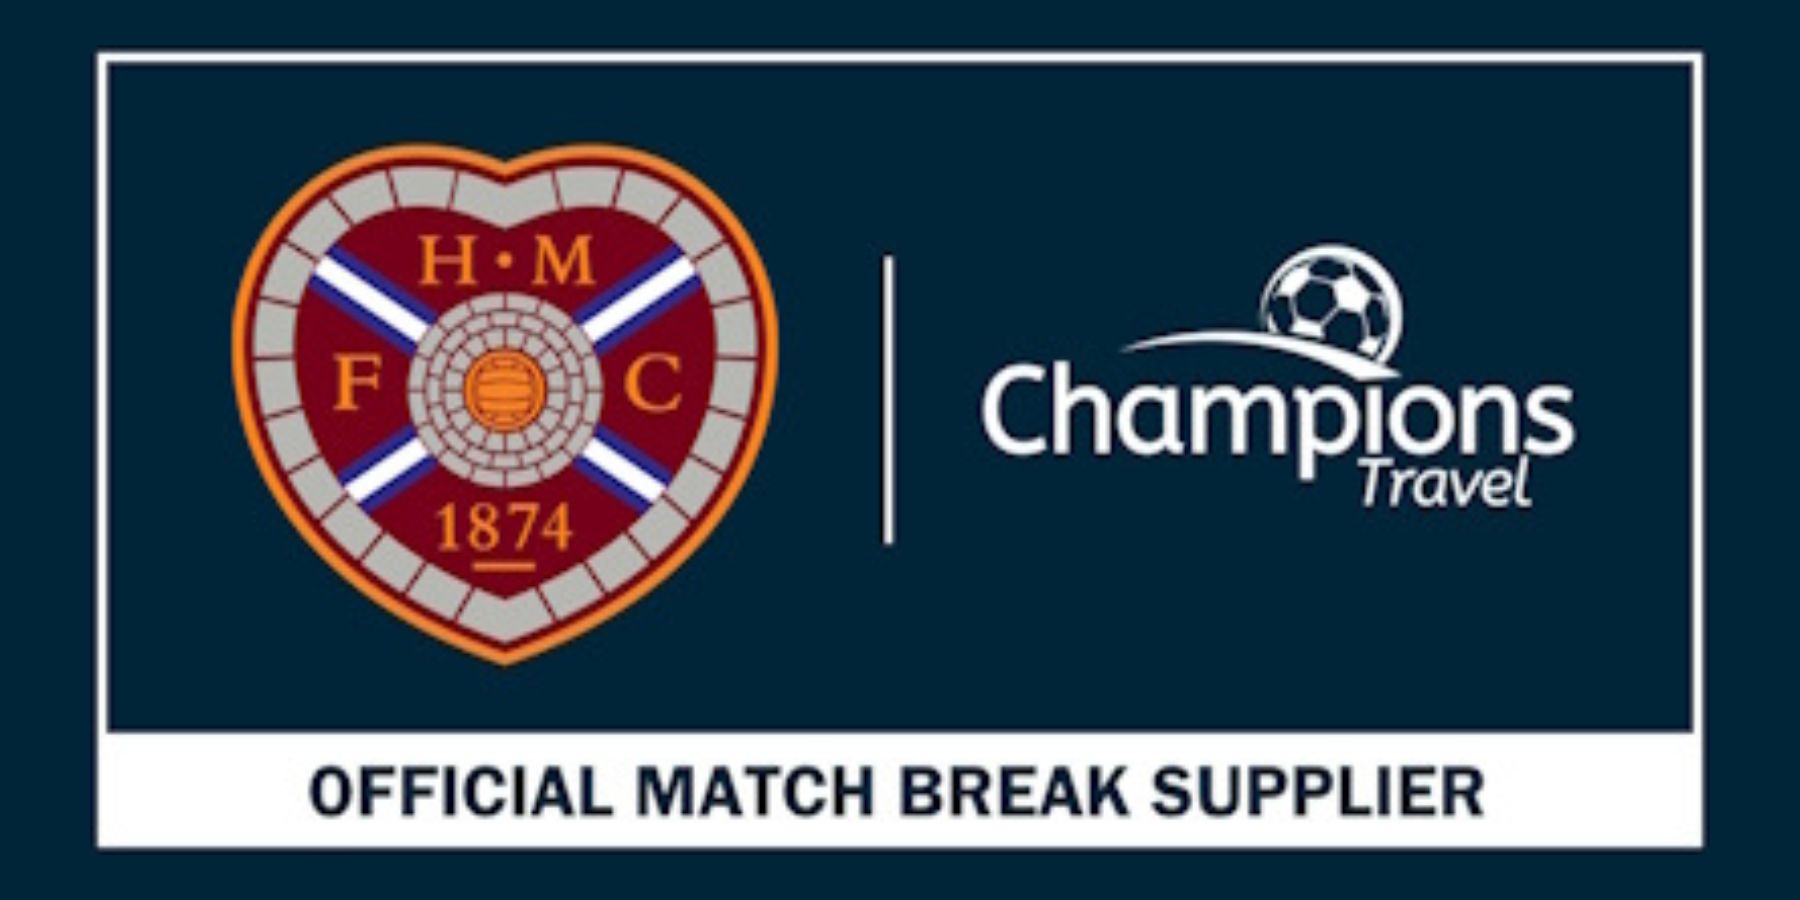 Announcing Our New Partnership with Heart of Midlothian